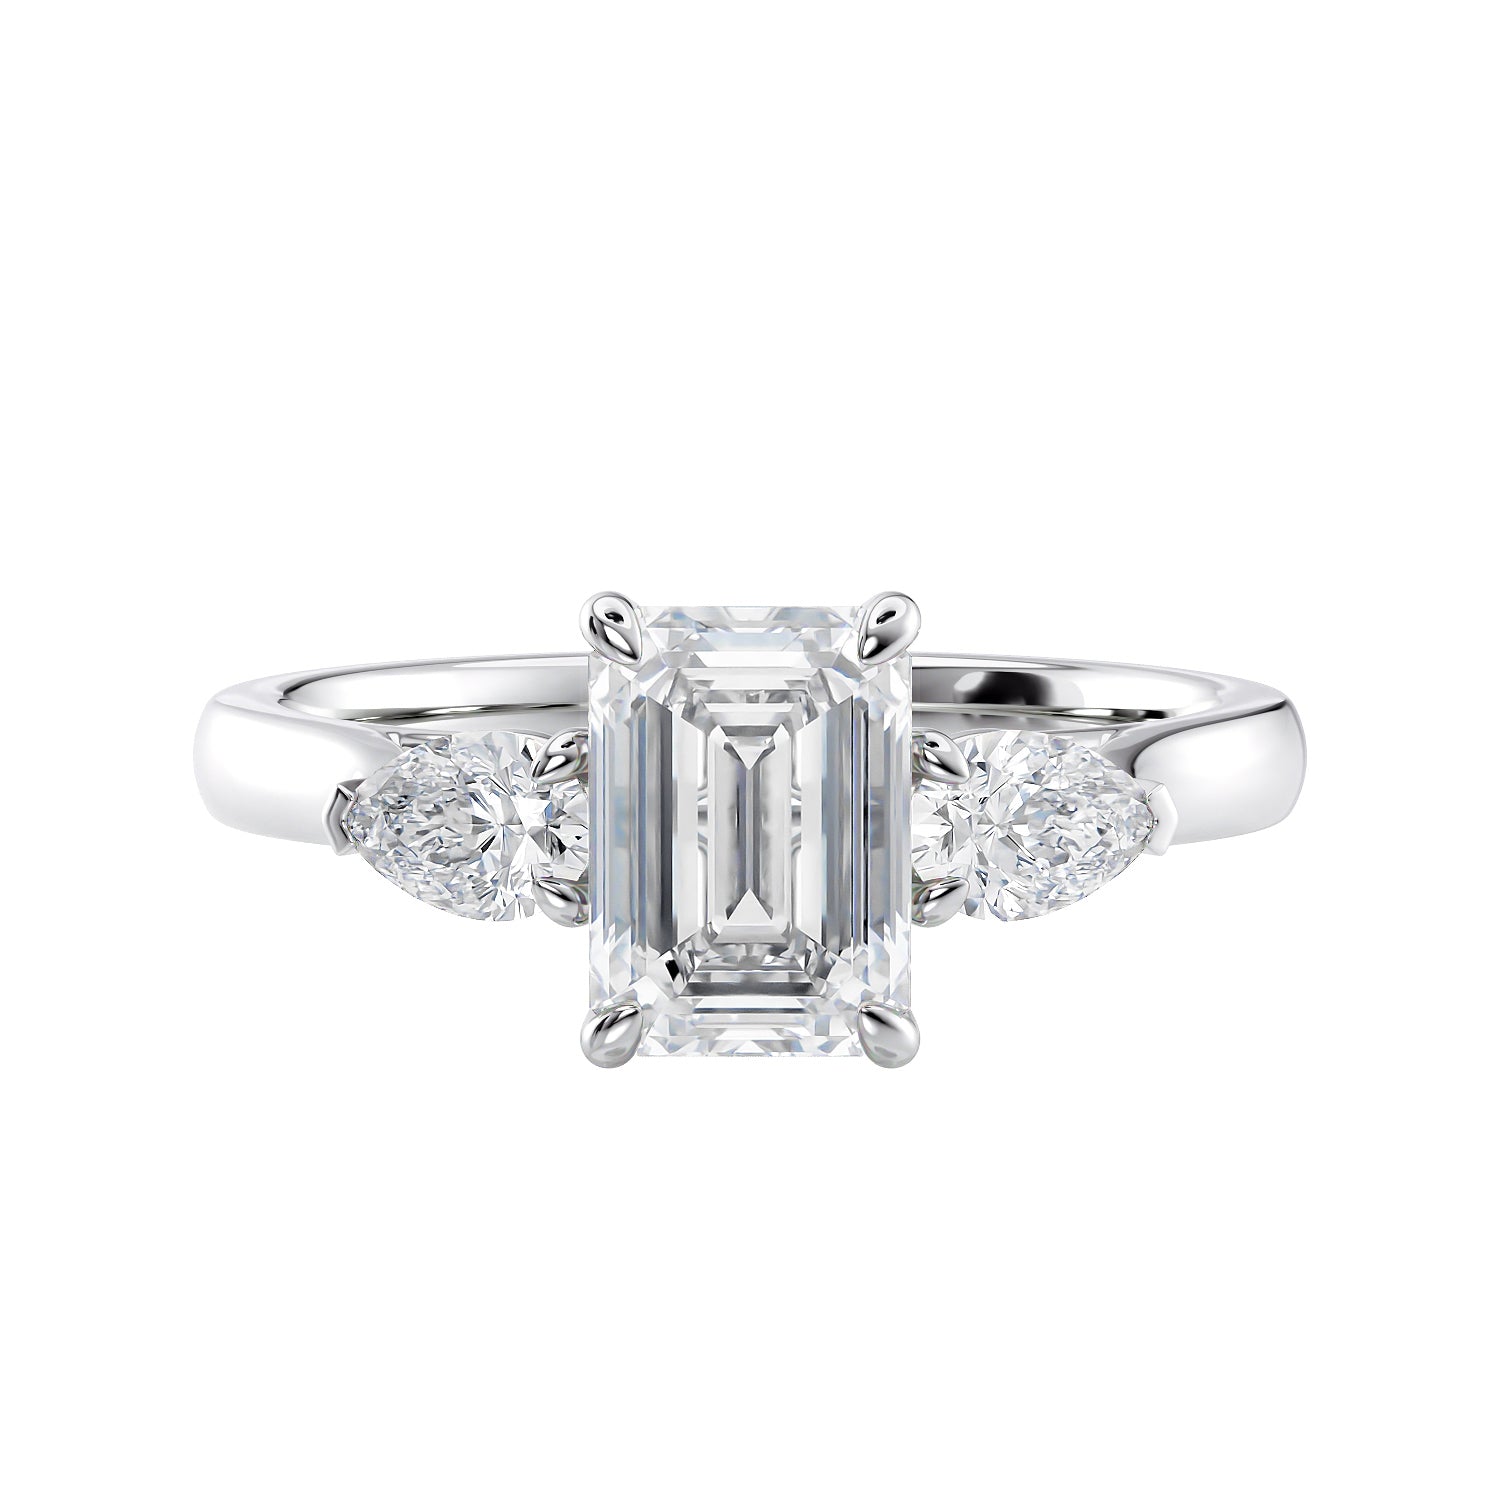 Emerald cut diamond engagement ring with pear sides white gold front view.